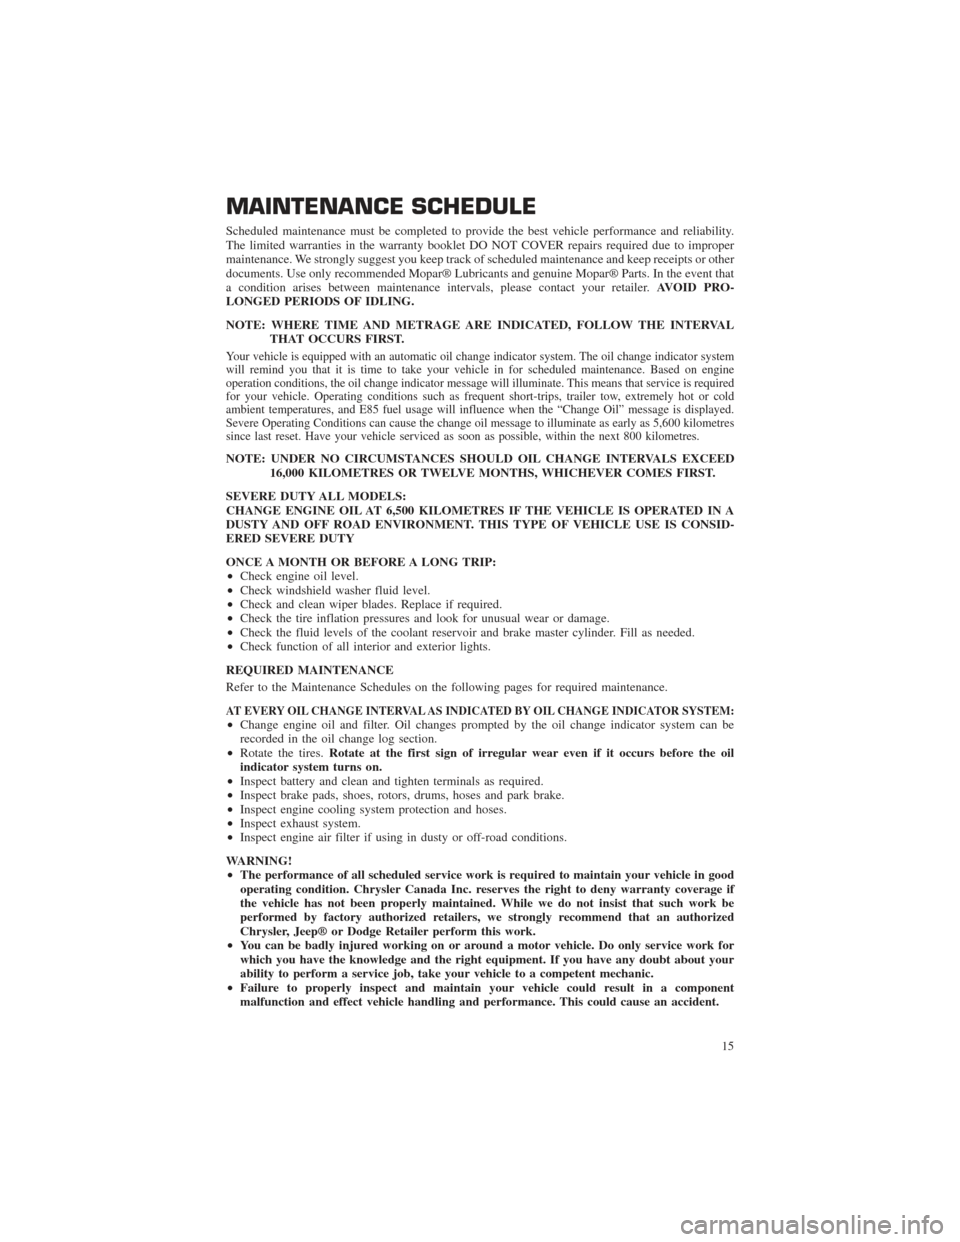 CHRYSLER 200 2015 2.G Warranty Booklet MAINTENANCE SCHEDULE
Scheduled maintenance must be completed to provide the best vehicle performance and reliability.
The limited warranties in the warranty booklet DO NOT COVER repairs required due t